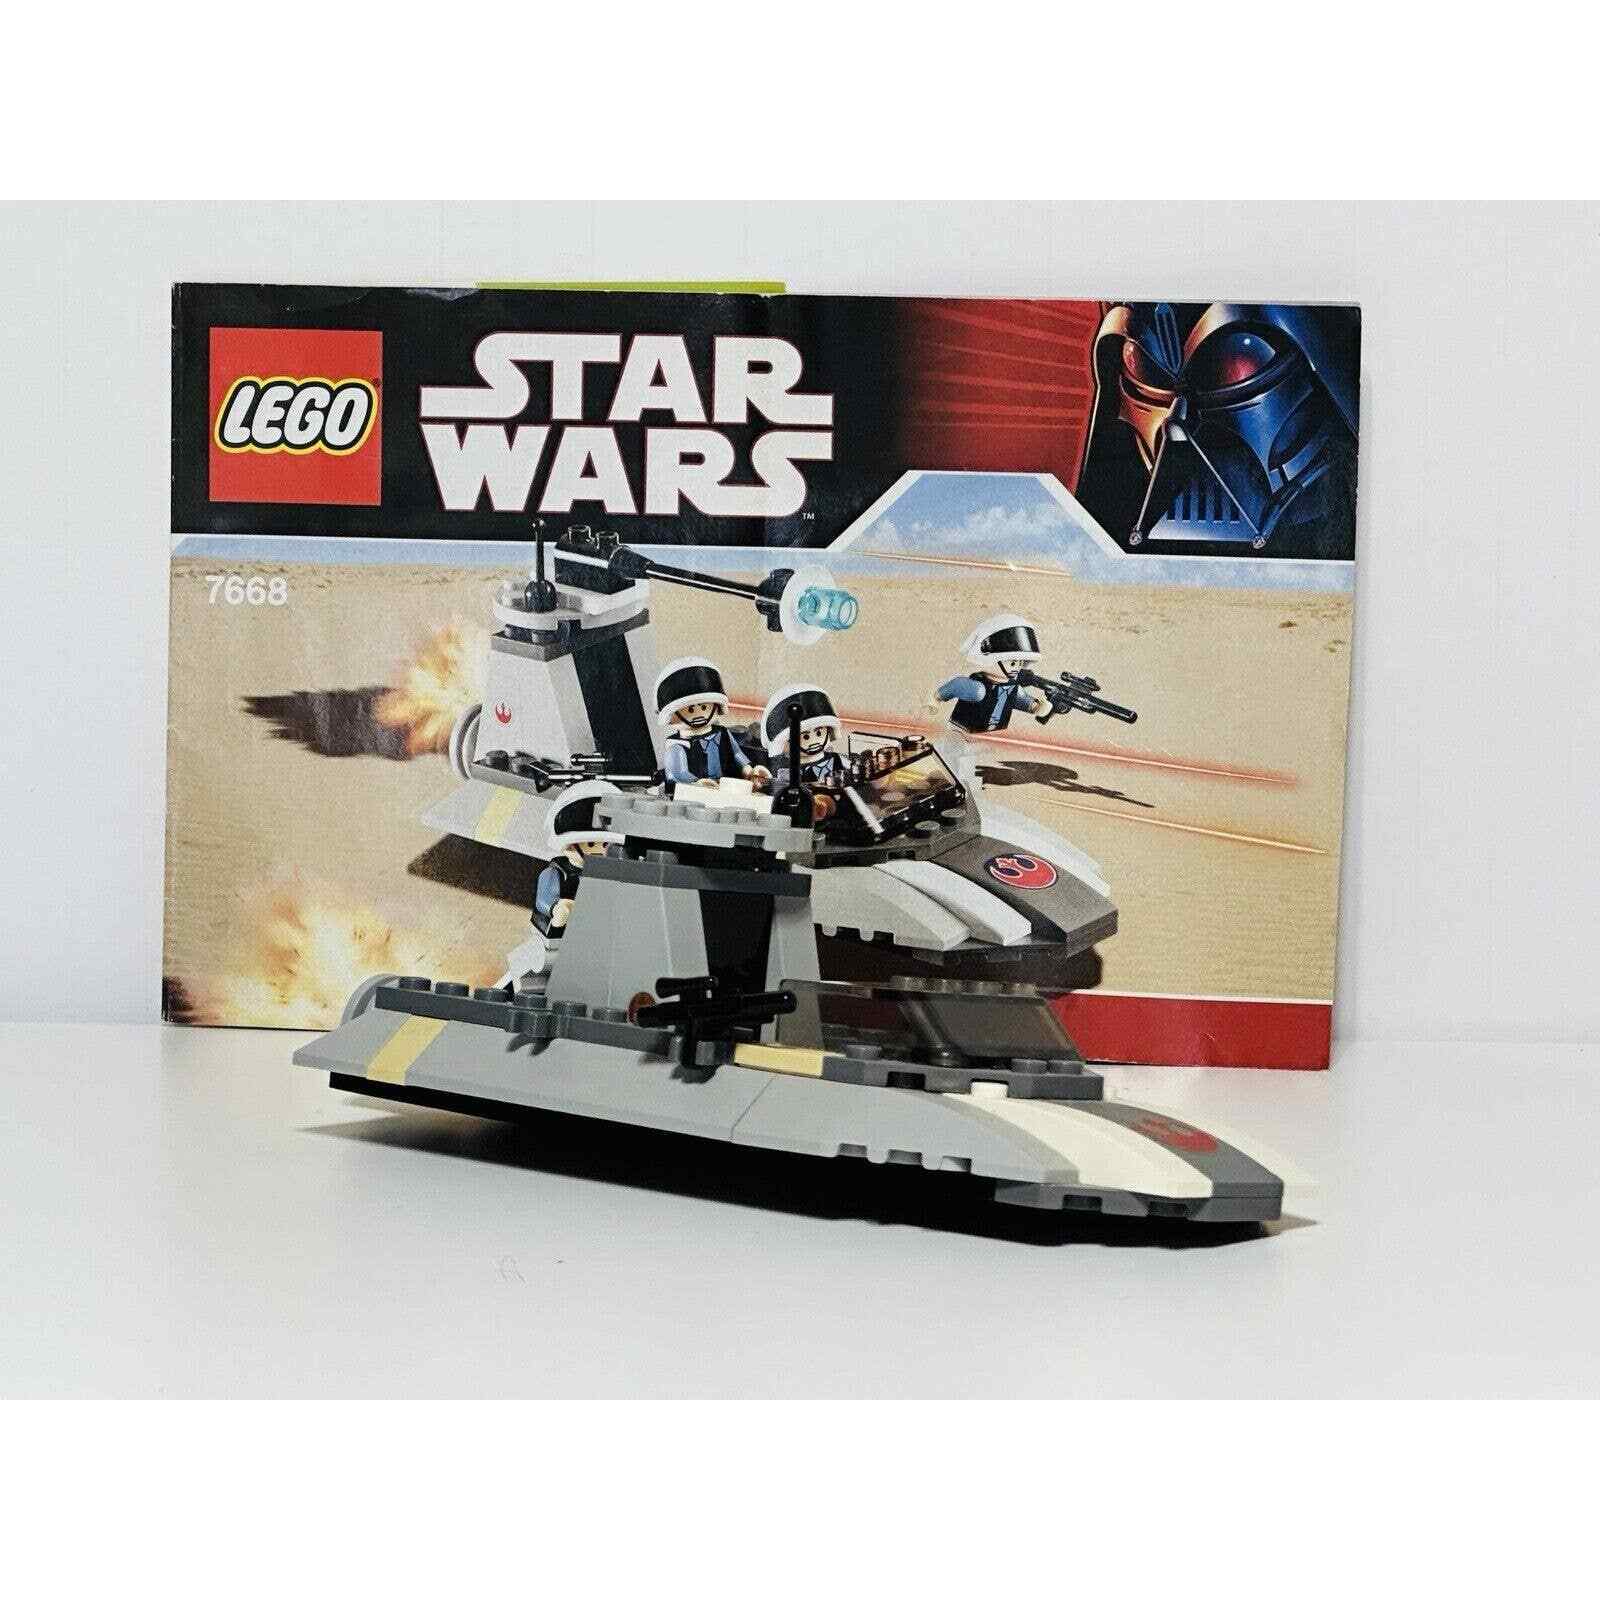 LEGO Star Wars 7668 Rebel Scout Speeder With Manual *INCOMPLETE*